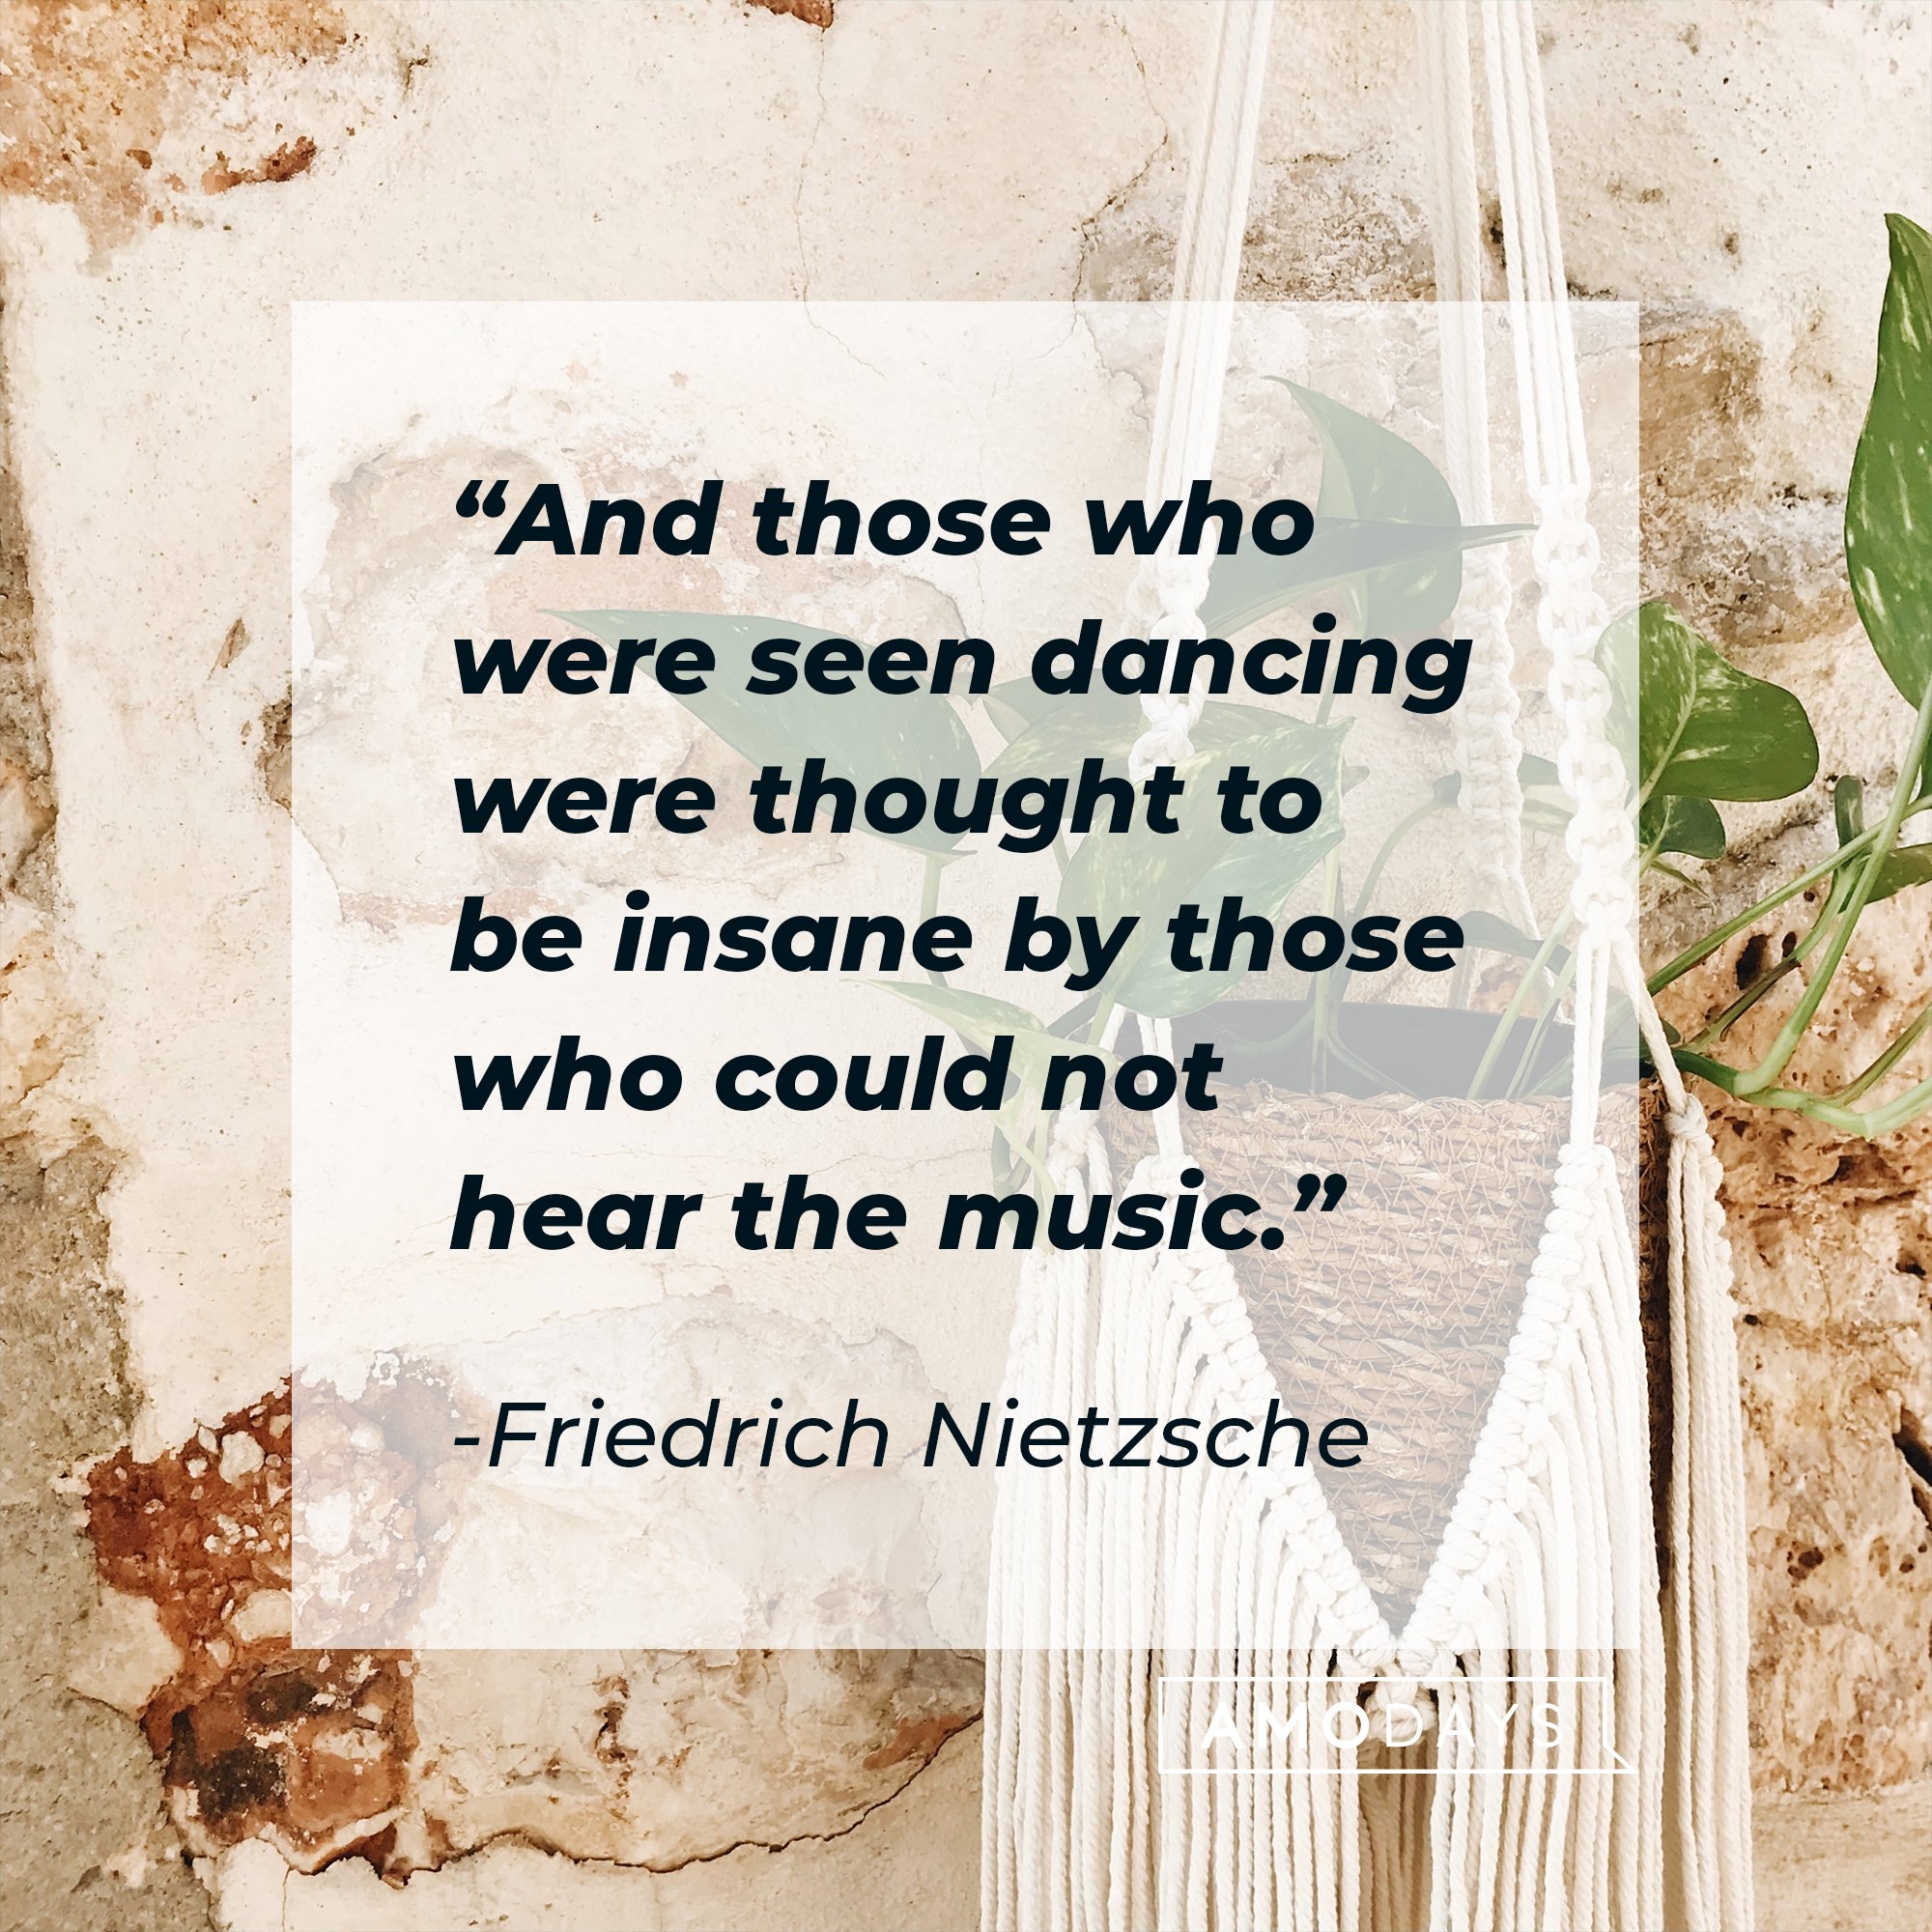  Friedrich Nietzsche's quote: "And those who were seen dancing were thought to be insane by those who could not hear the music." | Image: AmoDays   